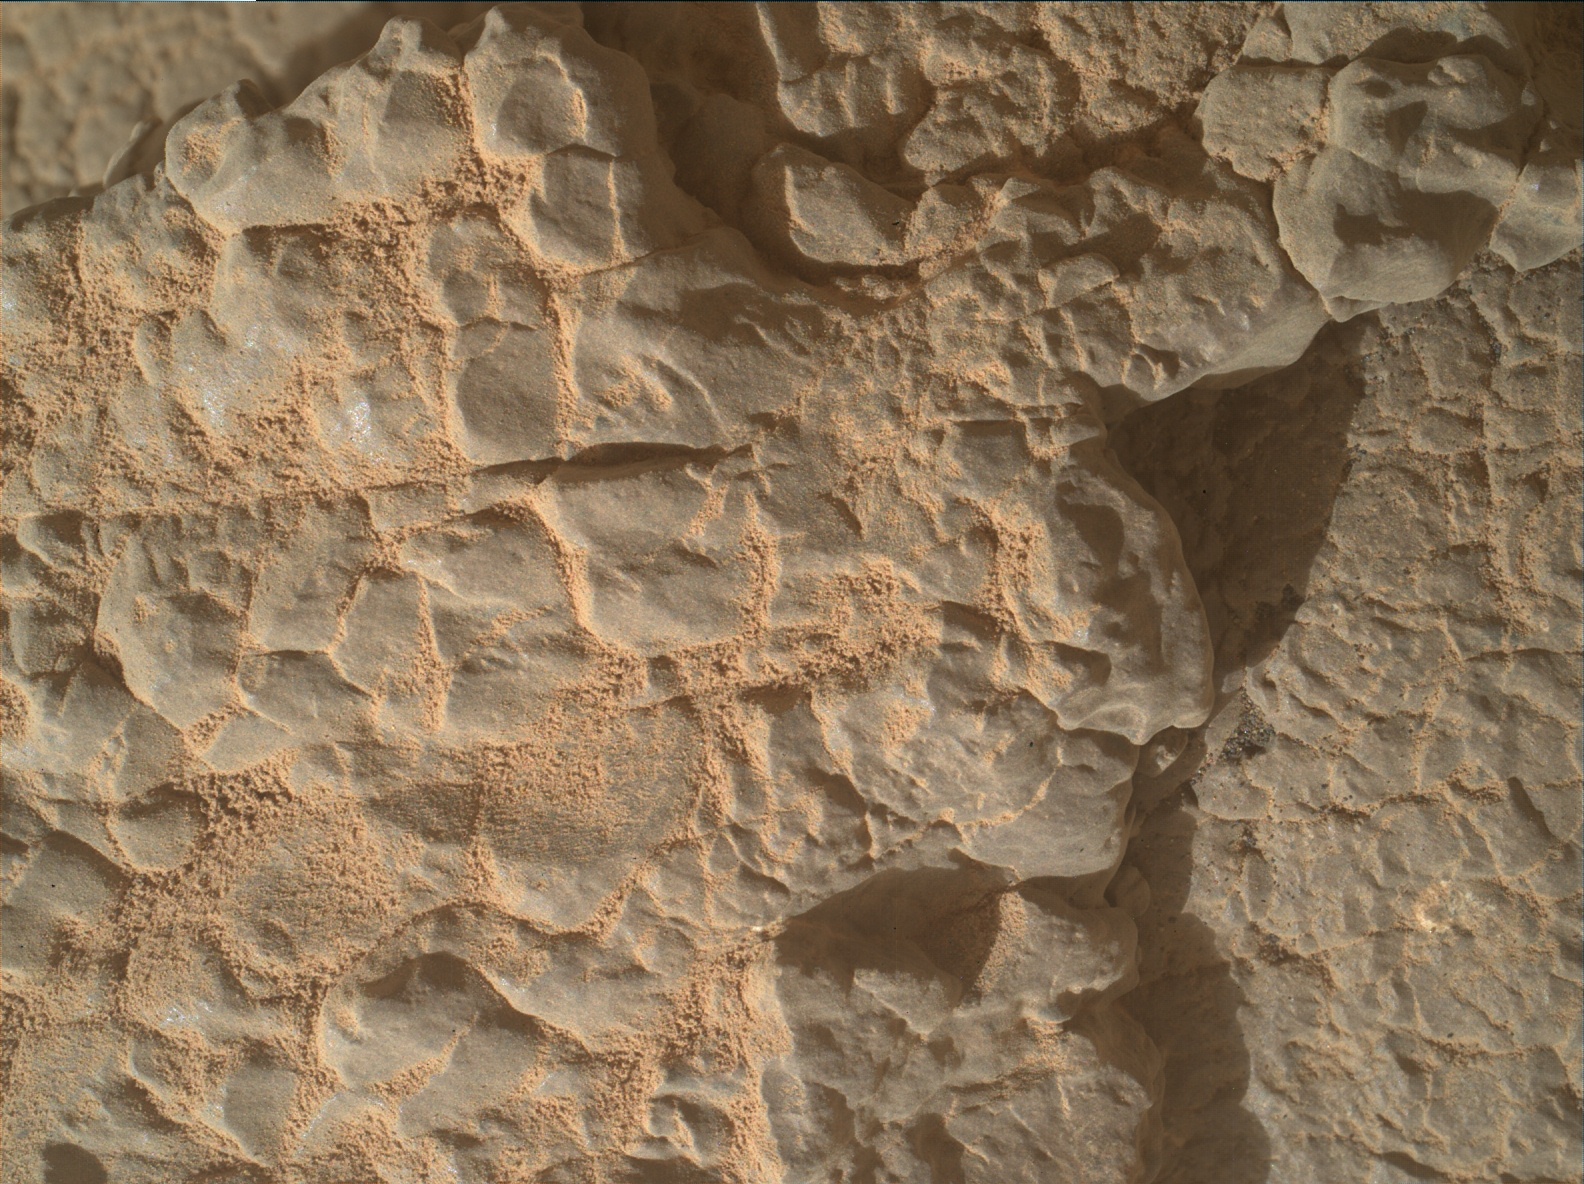 Nasa's Mars rover Curiosity acquired this image using its Mars Hand Lens Imager (MAHLI) on Sol 3540